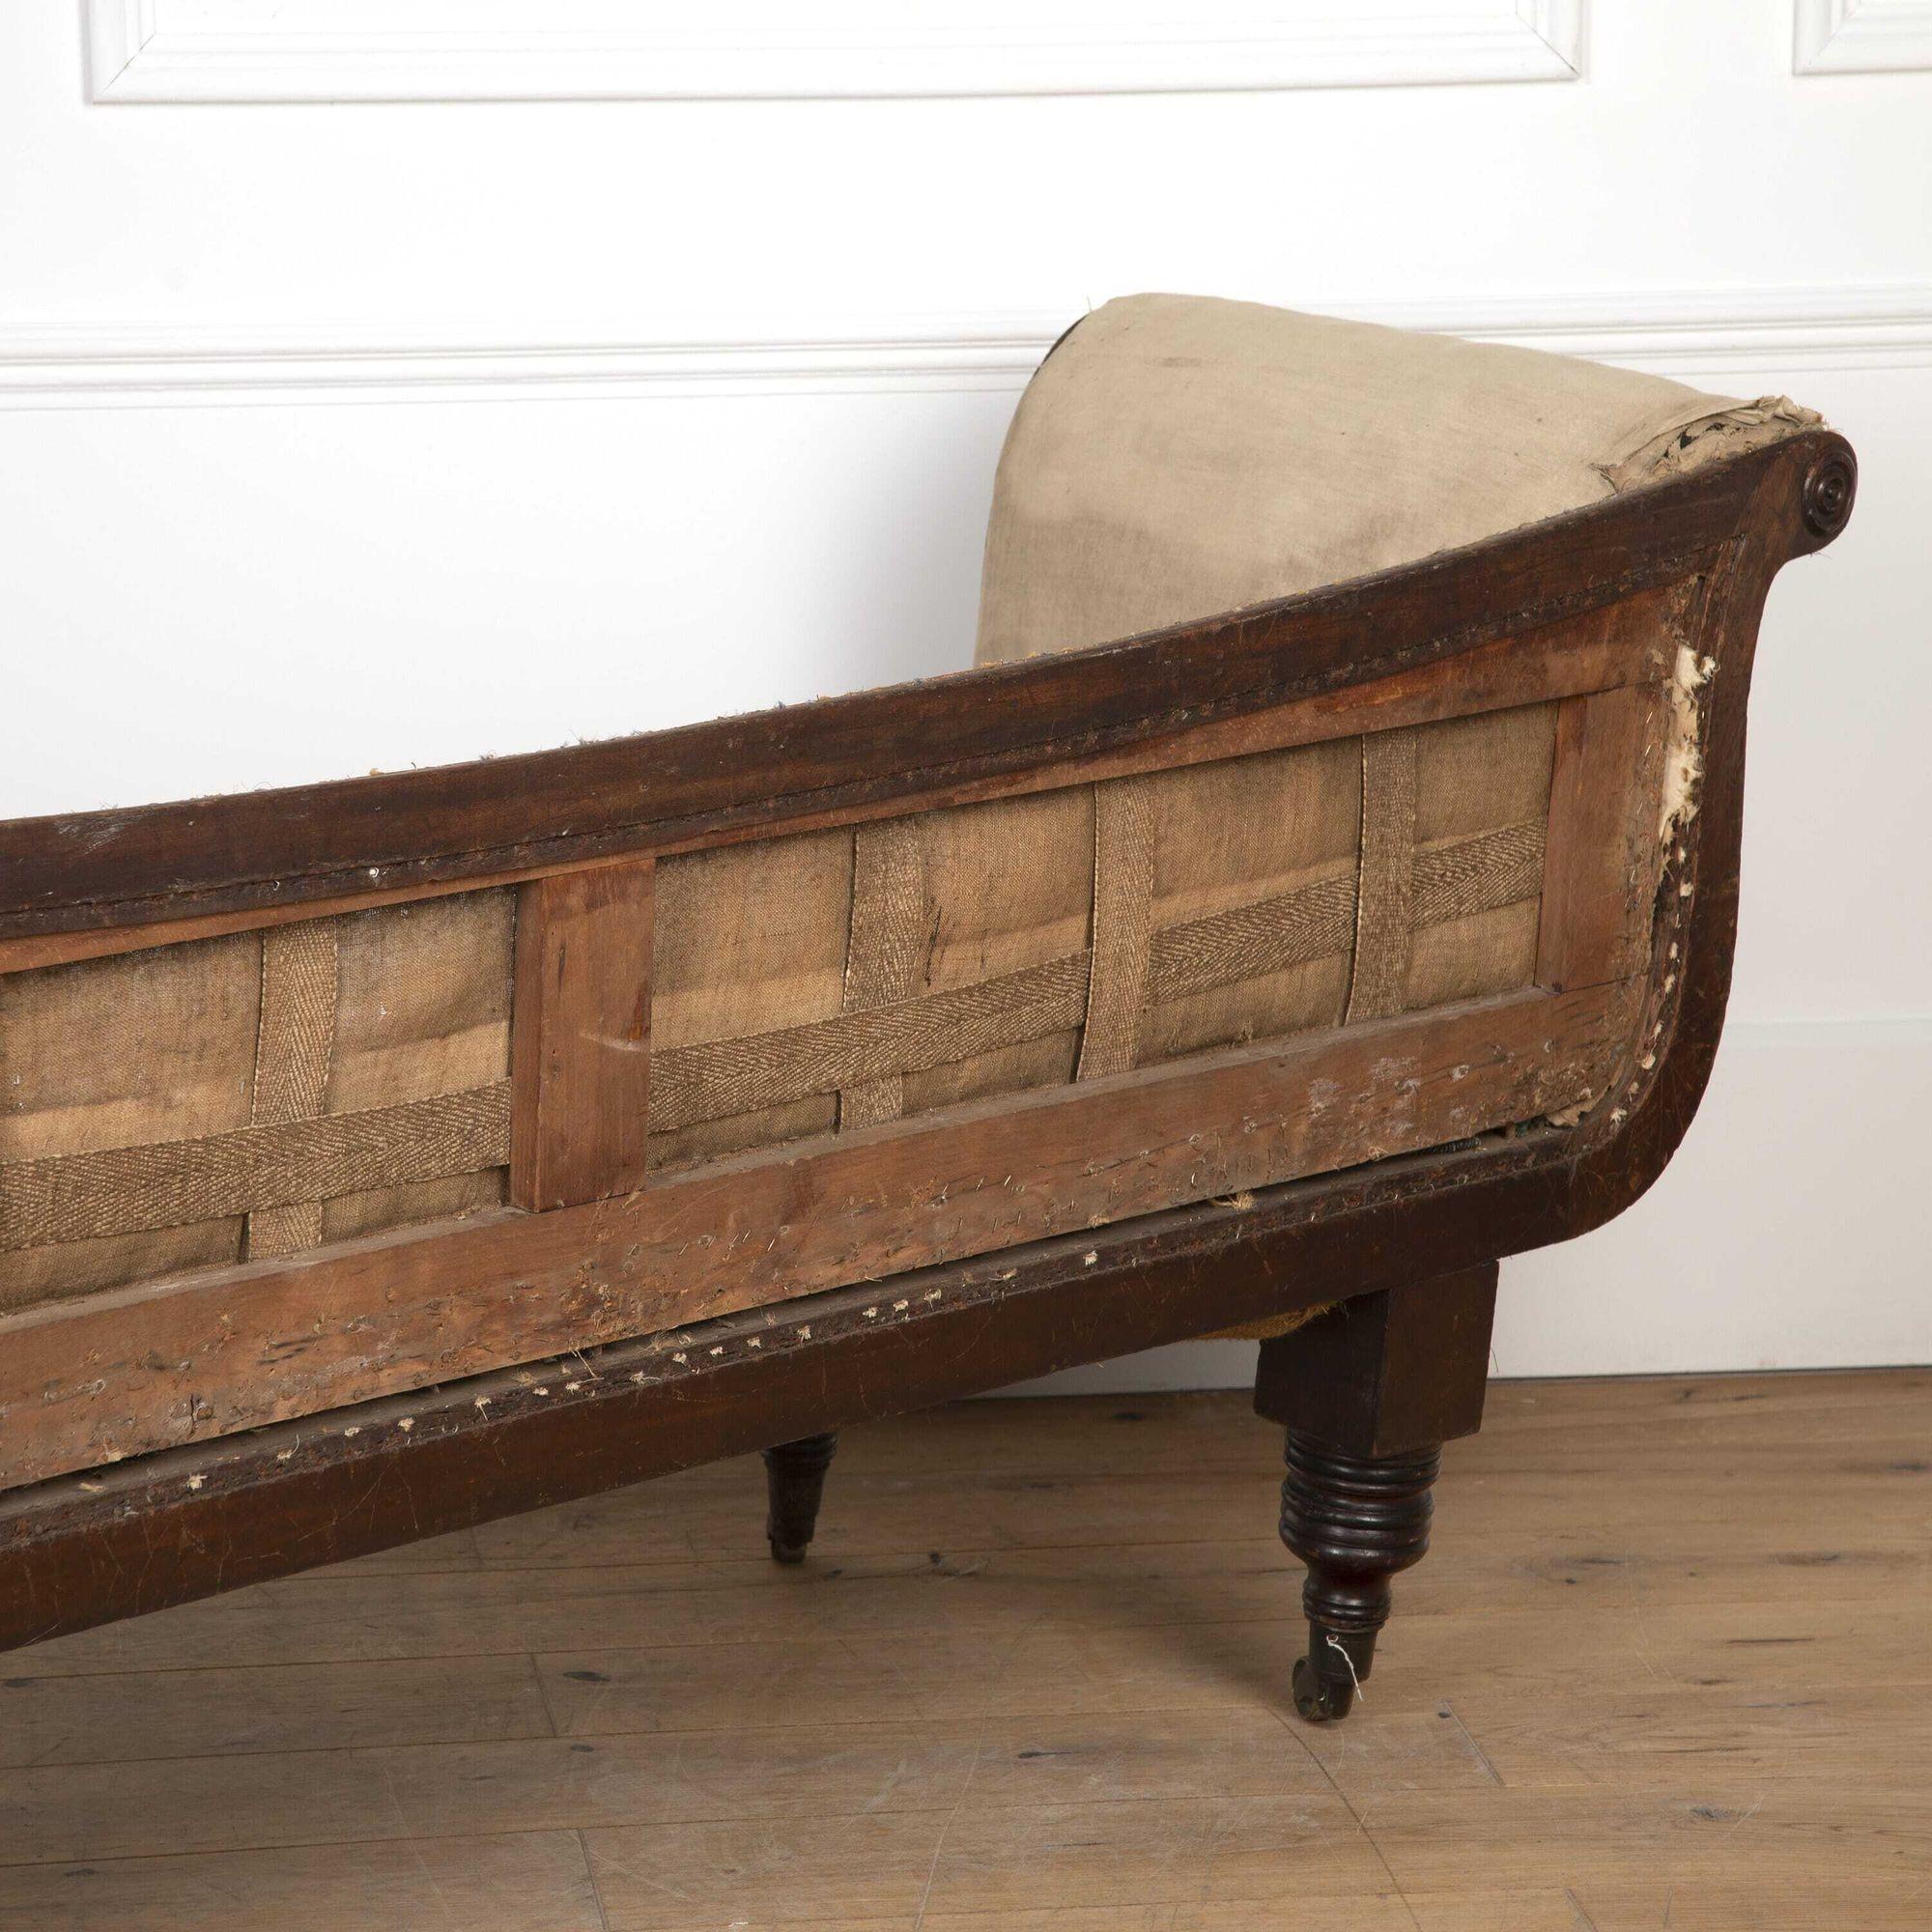 Superb Regency mahogany sofa in the Regency style.
With shapely scroll arms that terminate in roundels on both ends. This sofa also features a shaped back which is also finished on the reverse to make it available for freestanding.
Raised on